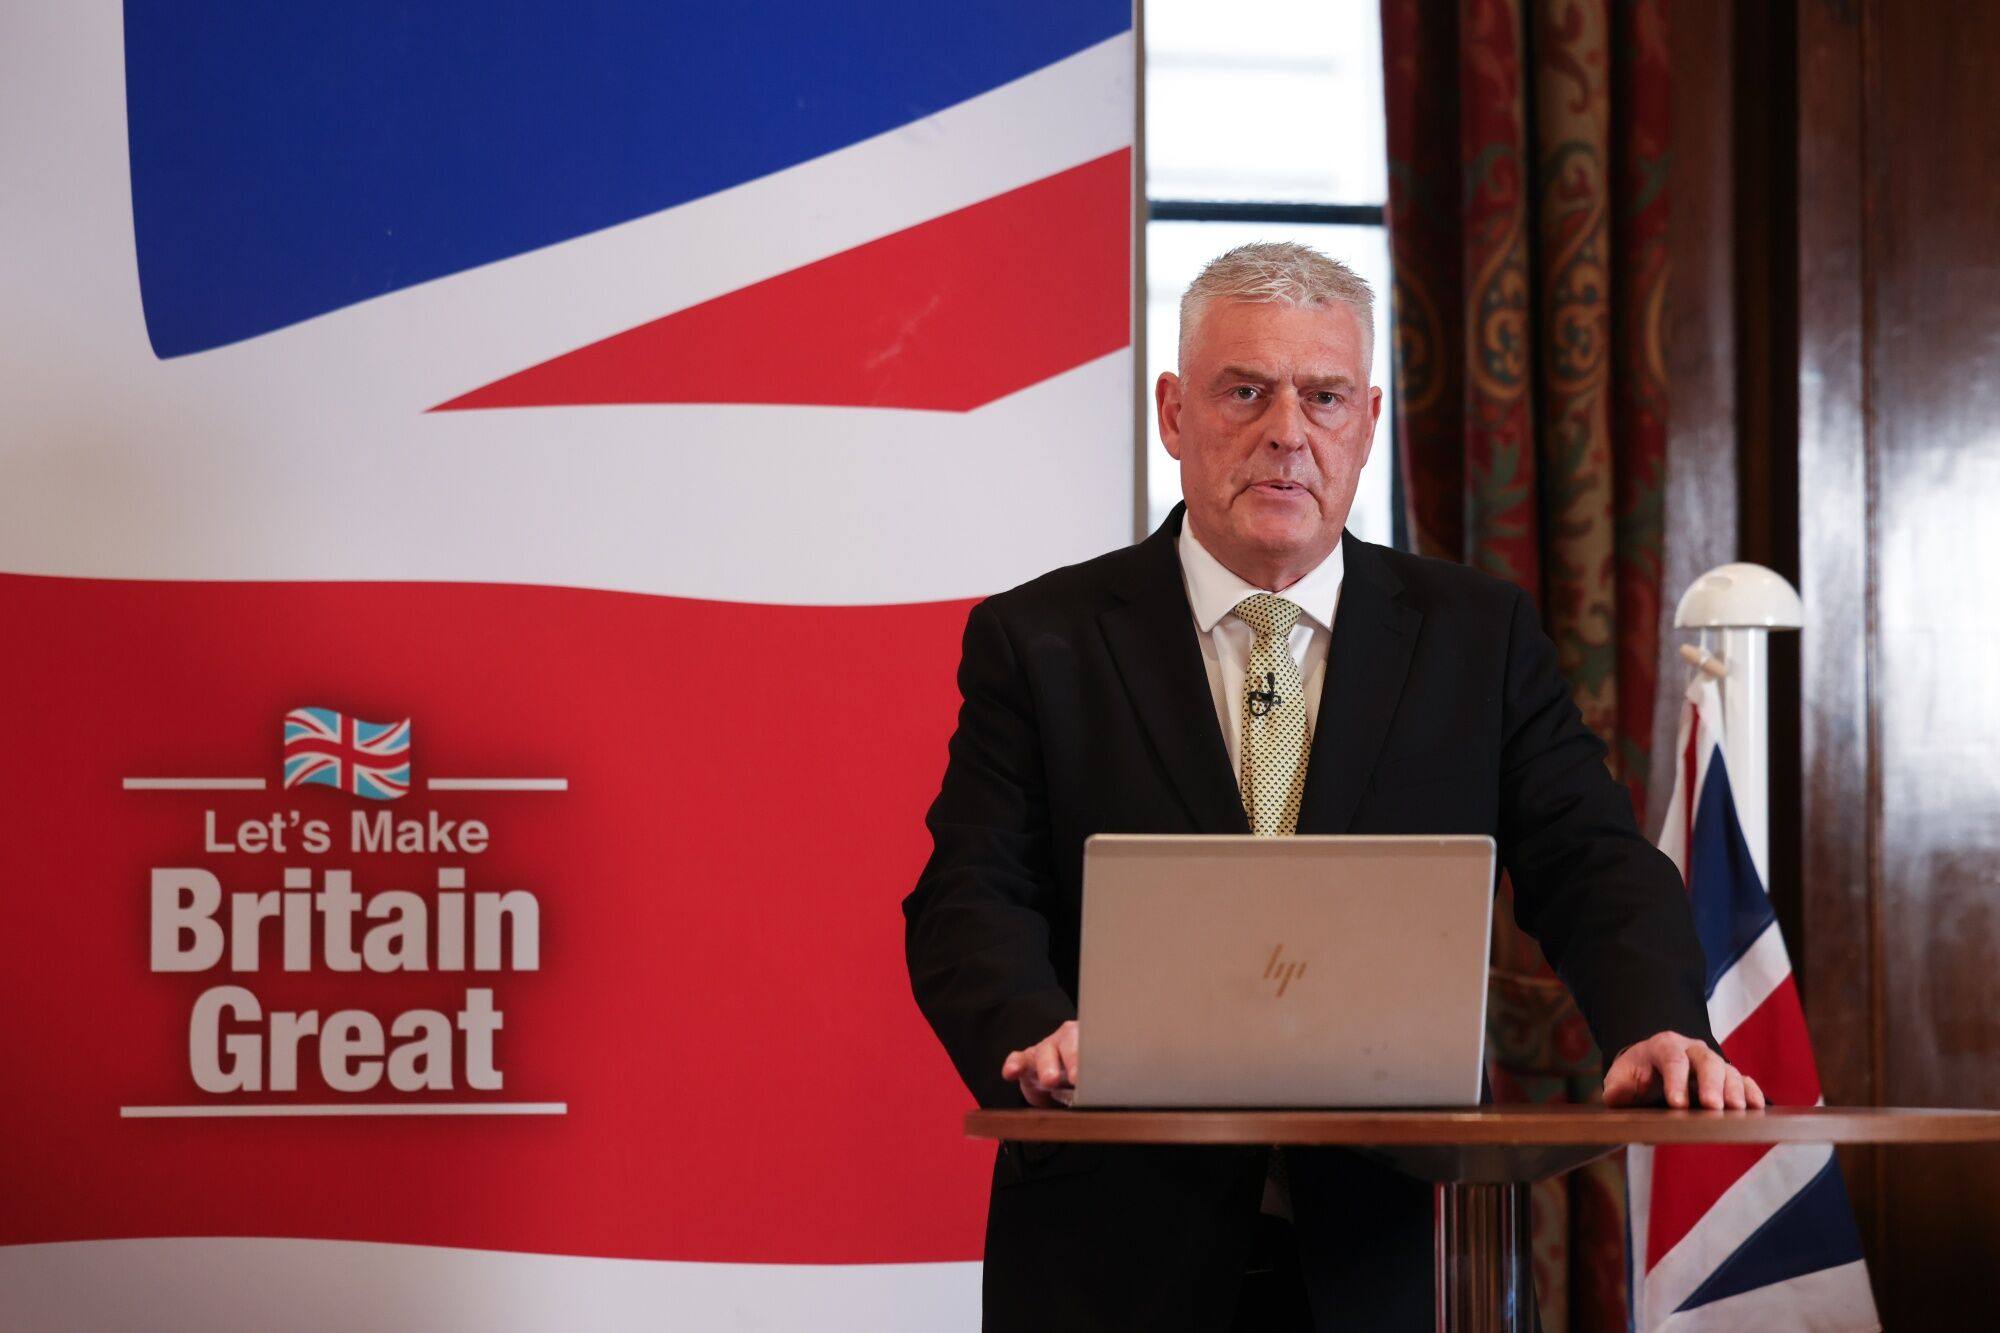 Lee Anderson announces his defection to Reform UK from the Conservative party on Monday. Photo: Bloomberg